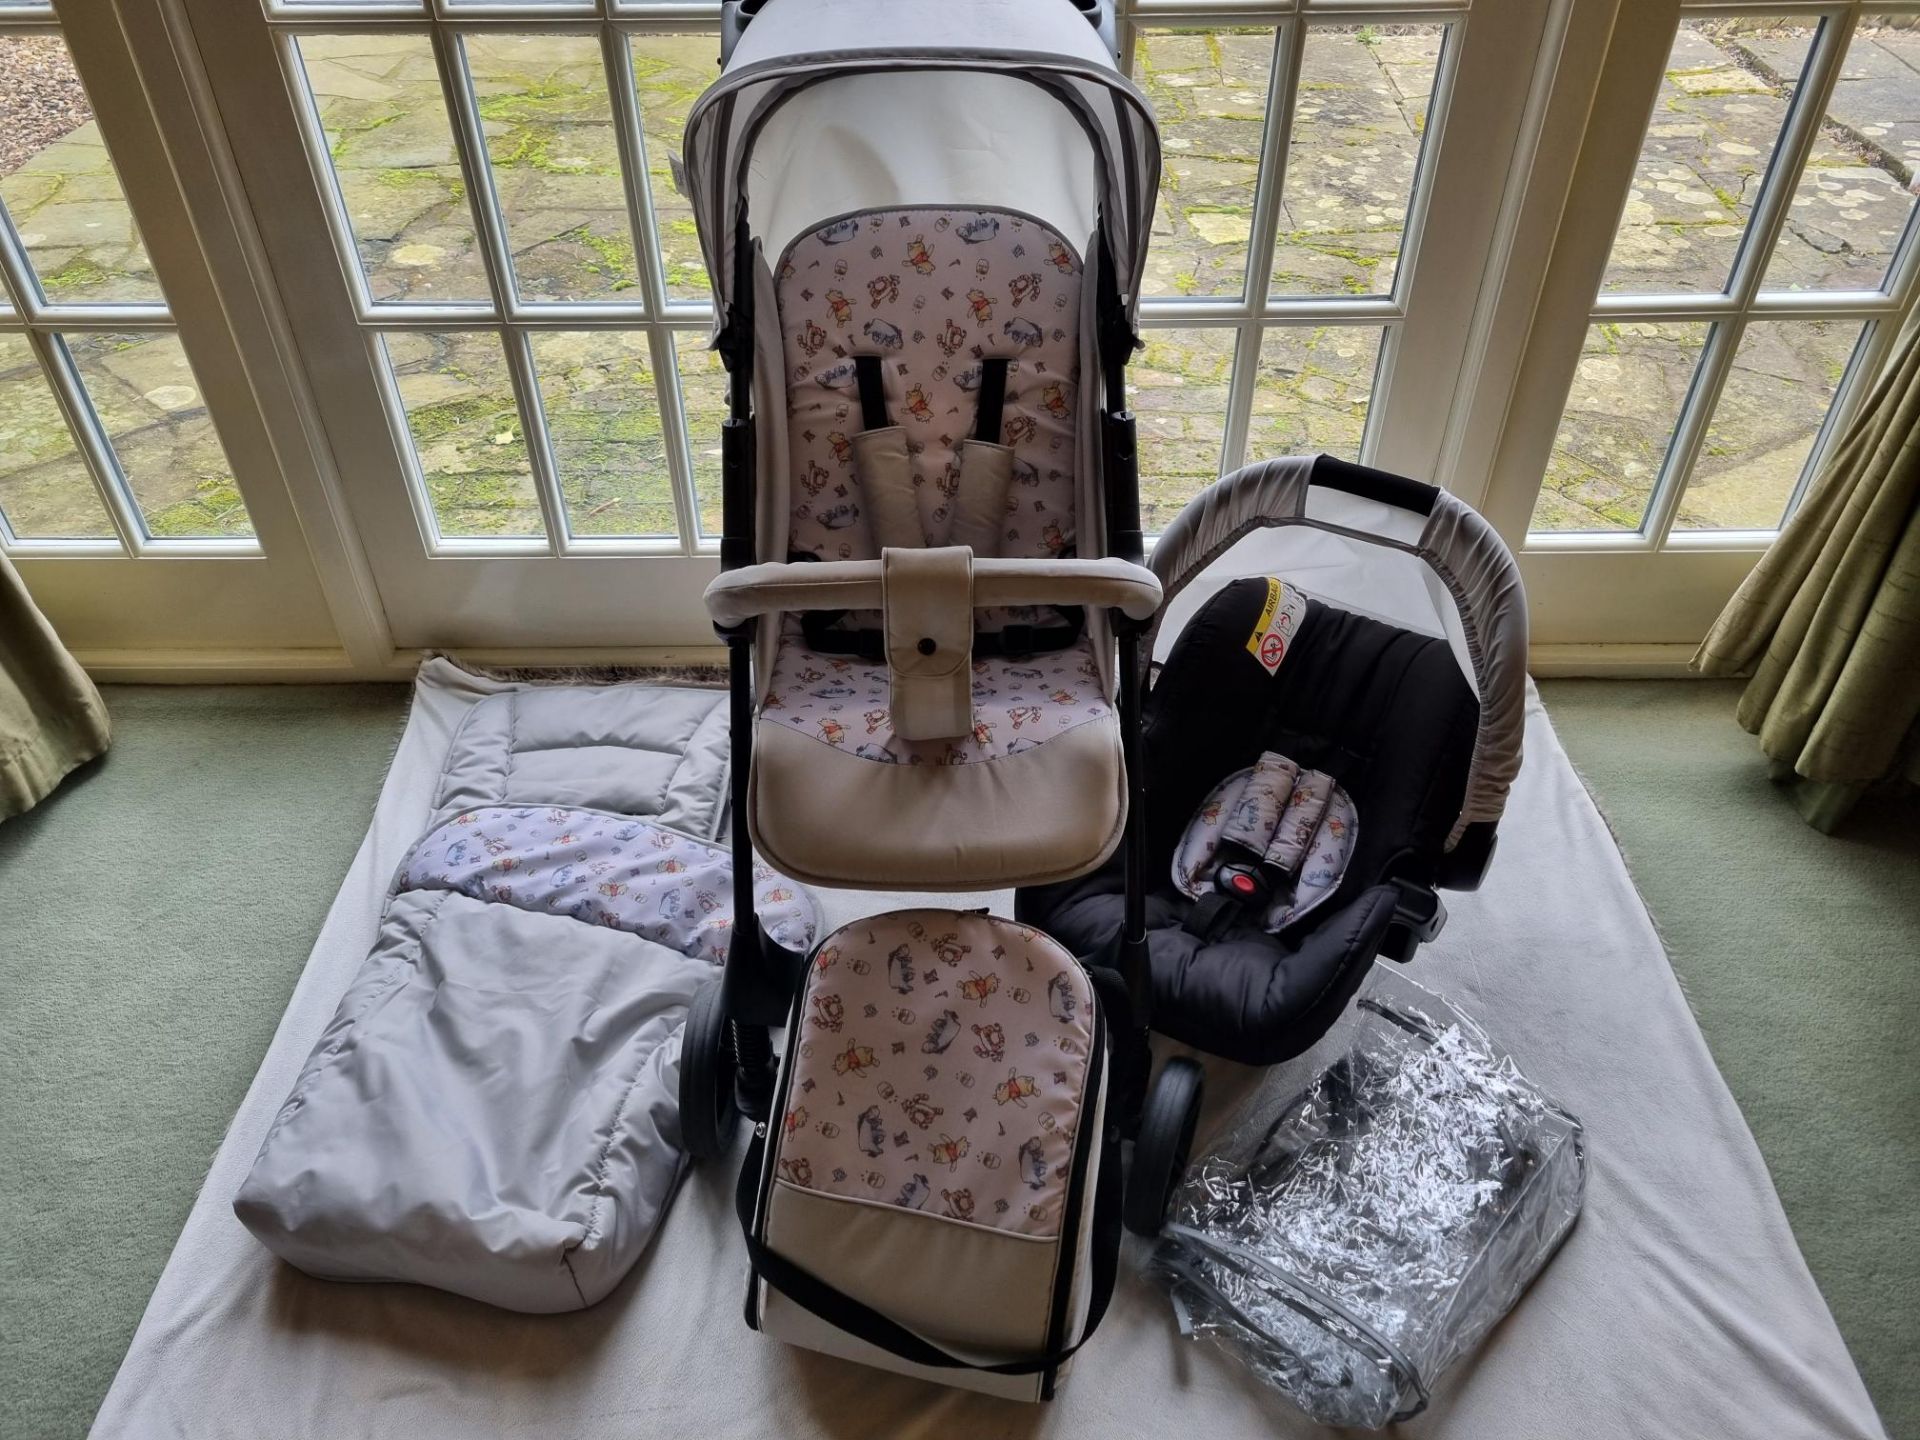 Hauck Disney Pushchair Travel System, Highchair, Tommee Tippee bottle warmer and case, playmat, toys - Image 2 of 24